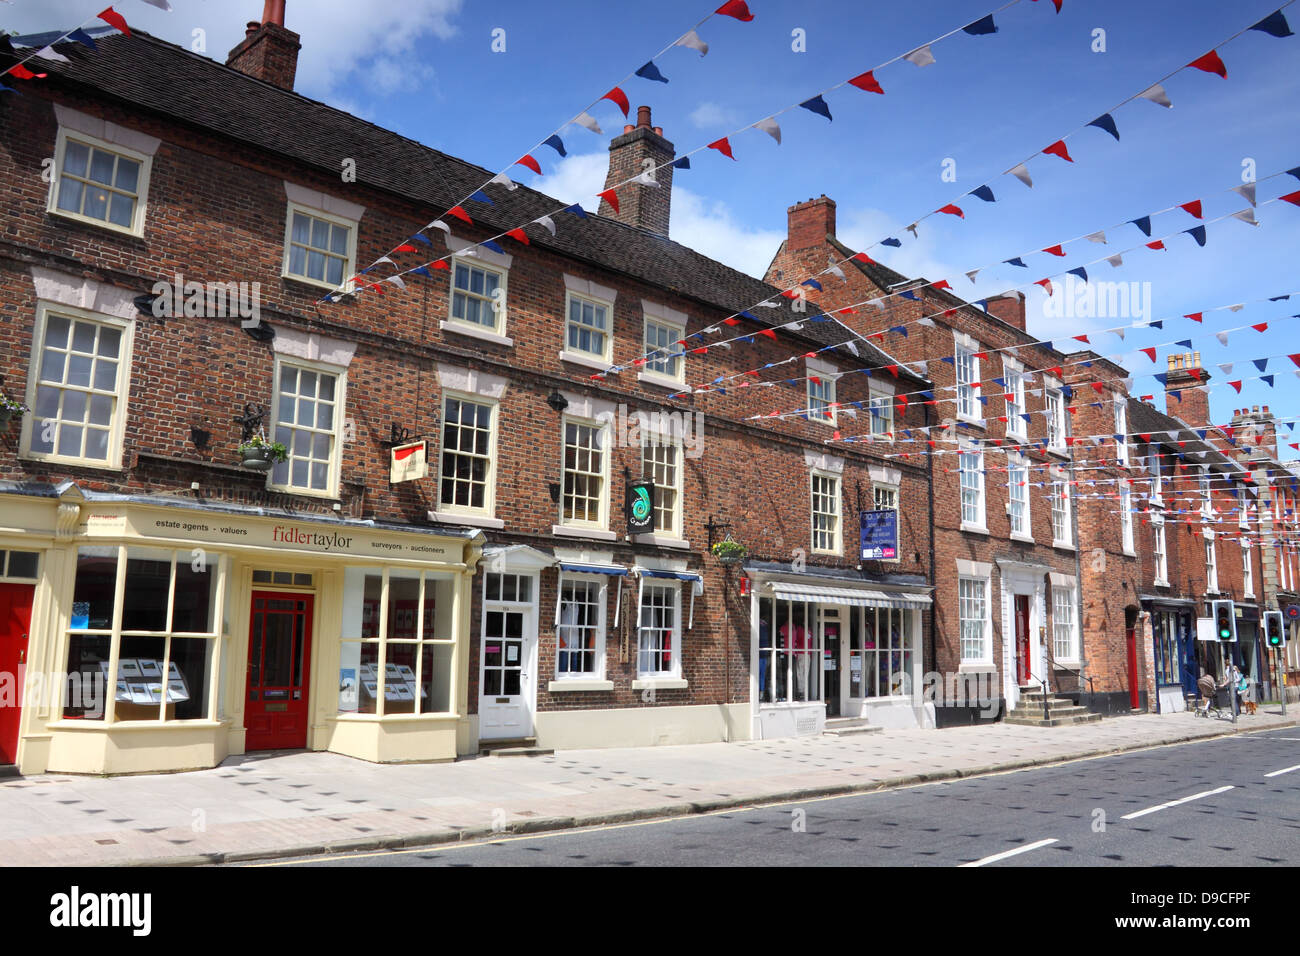 Bunting strung between shops in the pretty market town of Ashbourne, Derbyshire, England Stock Photo